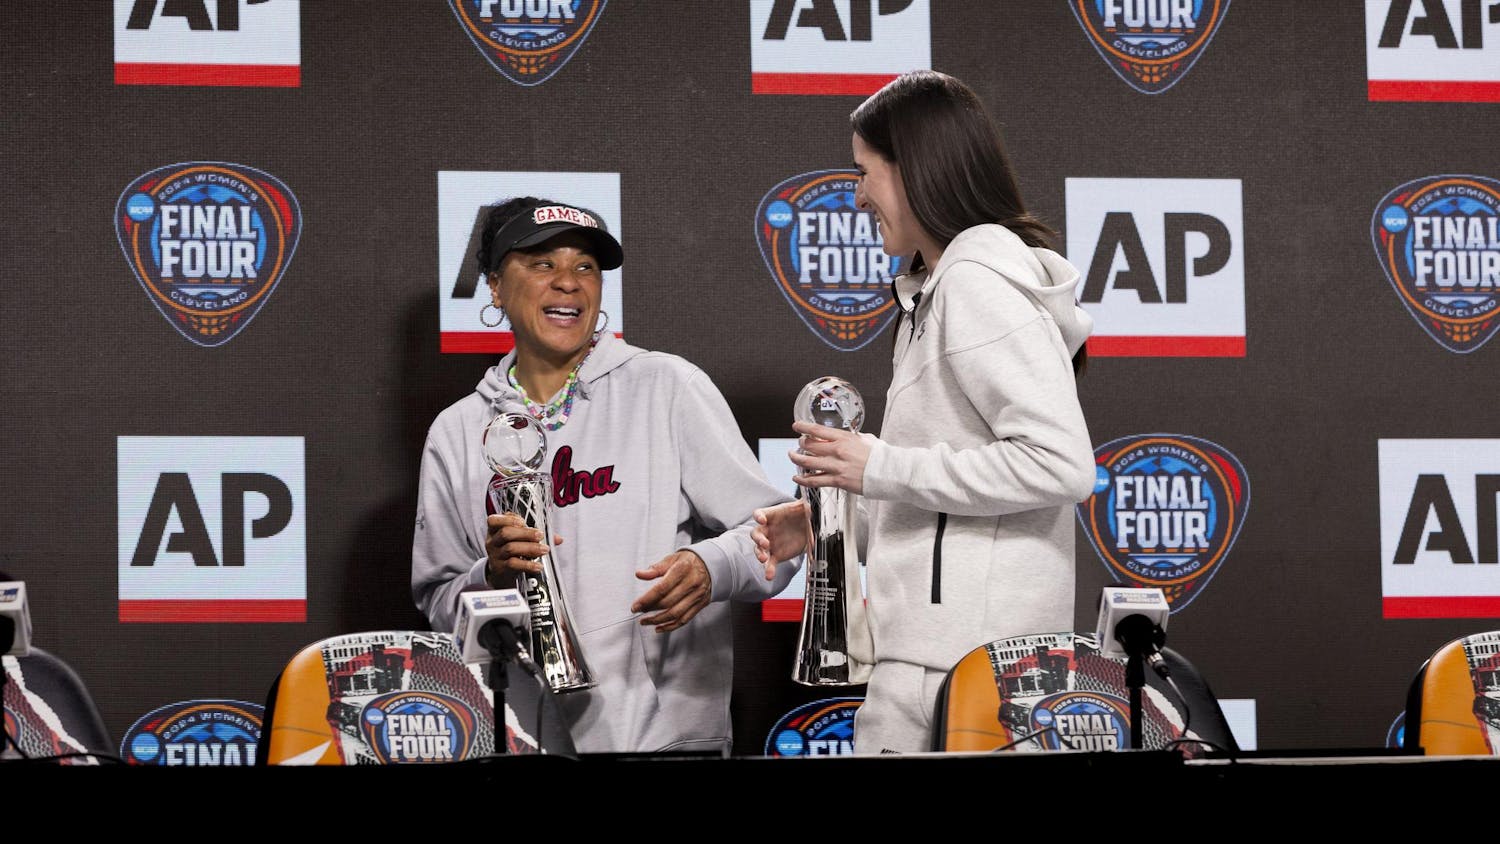 Gamecock women’s basketball head coach Dawn Staley (left) and Iowa senior guard Caitlin Clark (right) laugh while walking off stage after receiving their AP Coach and Player of the year awards, respectively. This is Staley's second time winning the AP Coach of the Year award. Staley also earned the Women's Basketball Coaches Association award for the third consecutive year and the fourth time in five years.